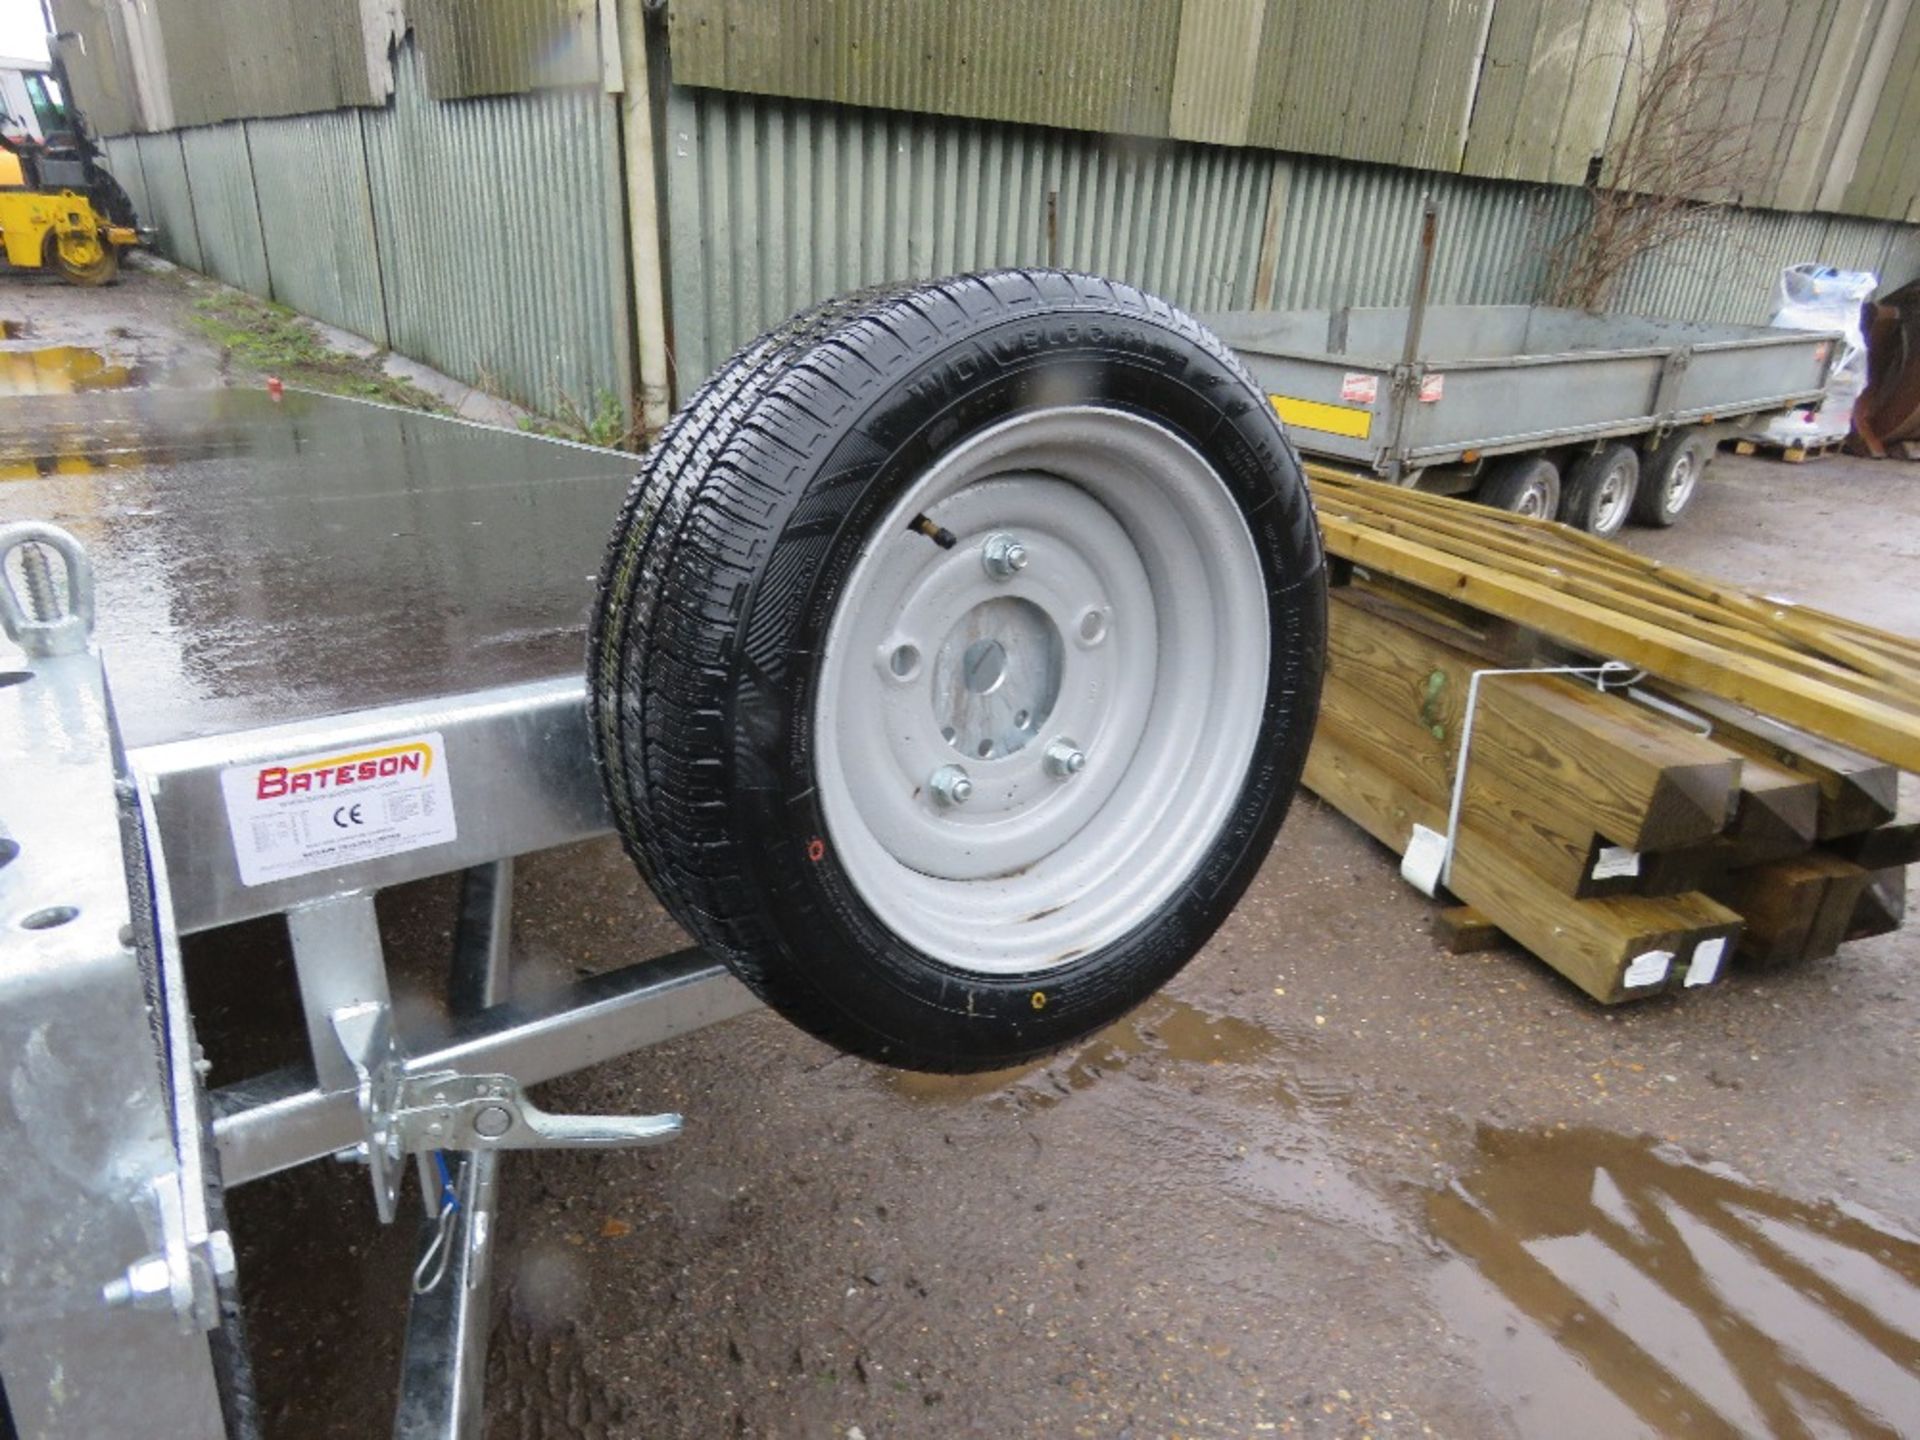 BATESON TILT BED TRIAXLE 3500KG FLAT TRAILER WITH WINCH 22FT LENGTH X 8FT WIDTH. WITH RAMPS UNDERNEA - Image 10 of 11